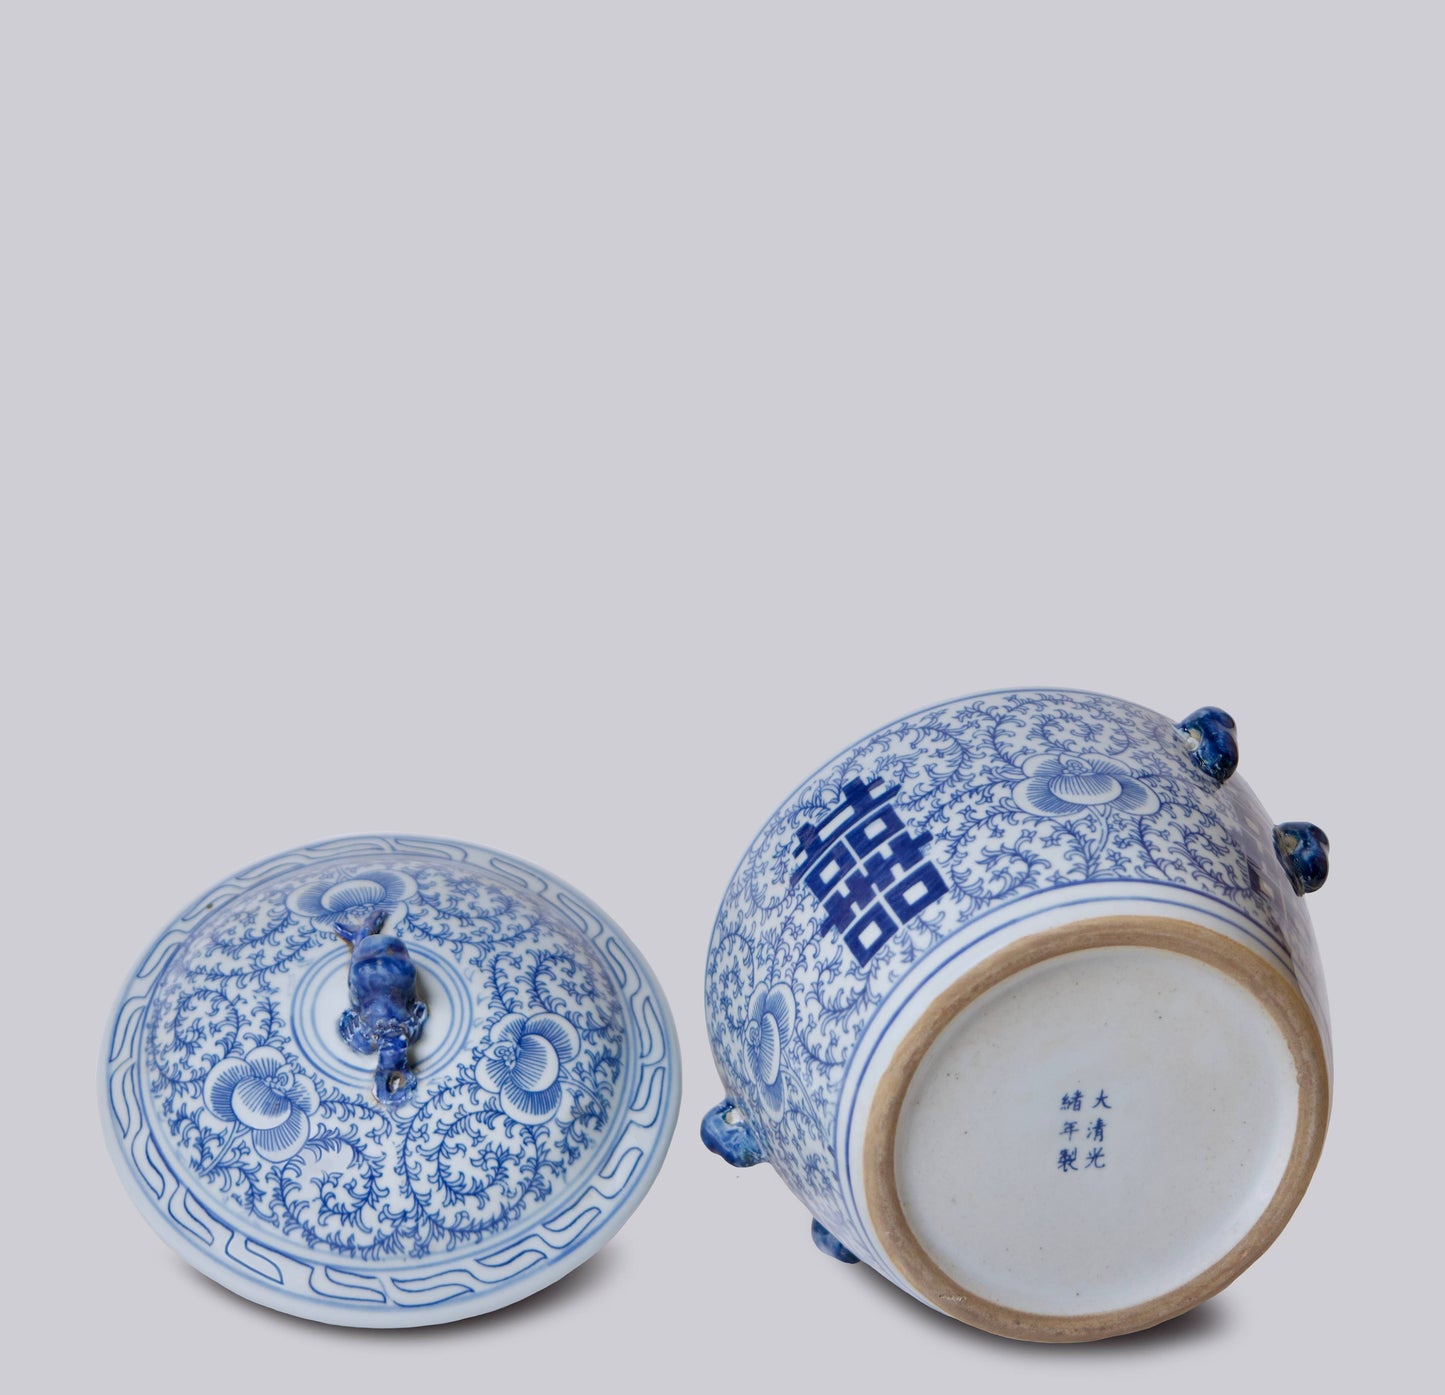 Small Blue and White Porcelain Double Happiness Lug Jar